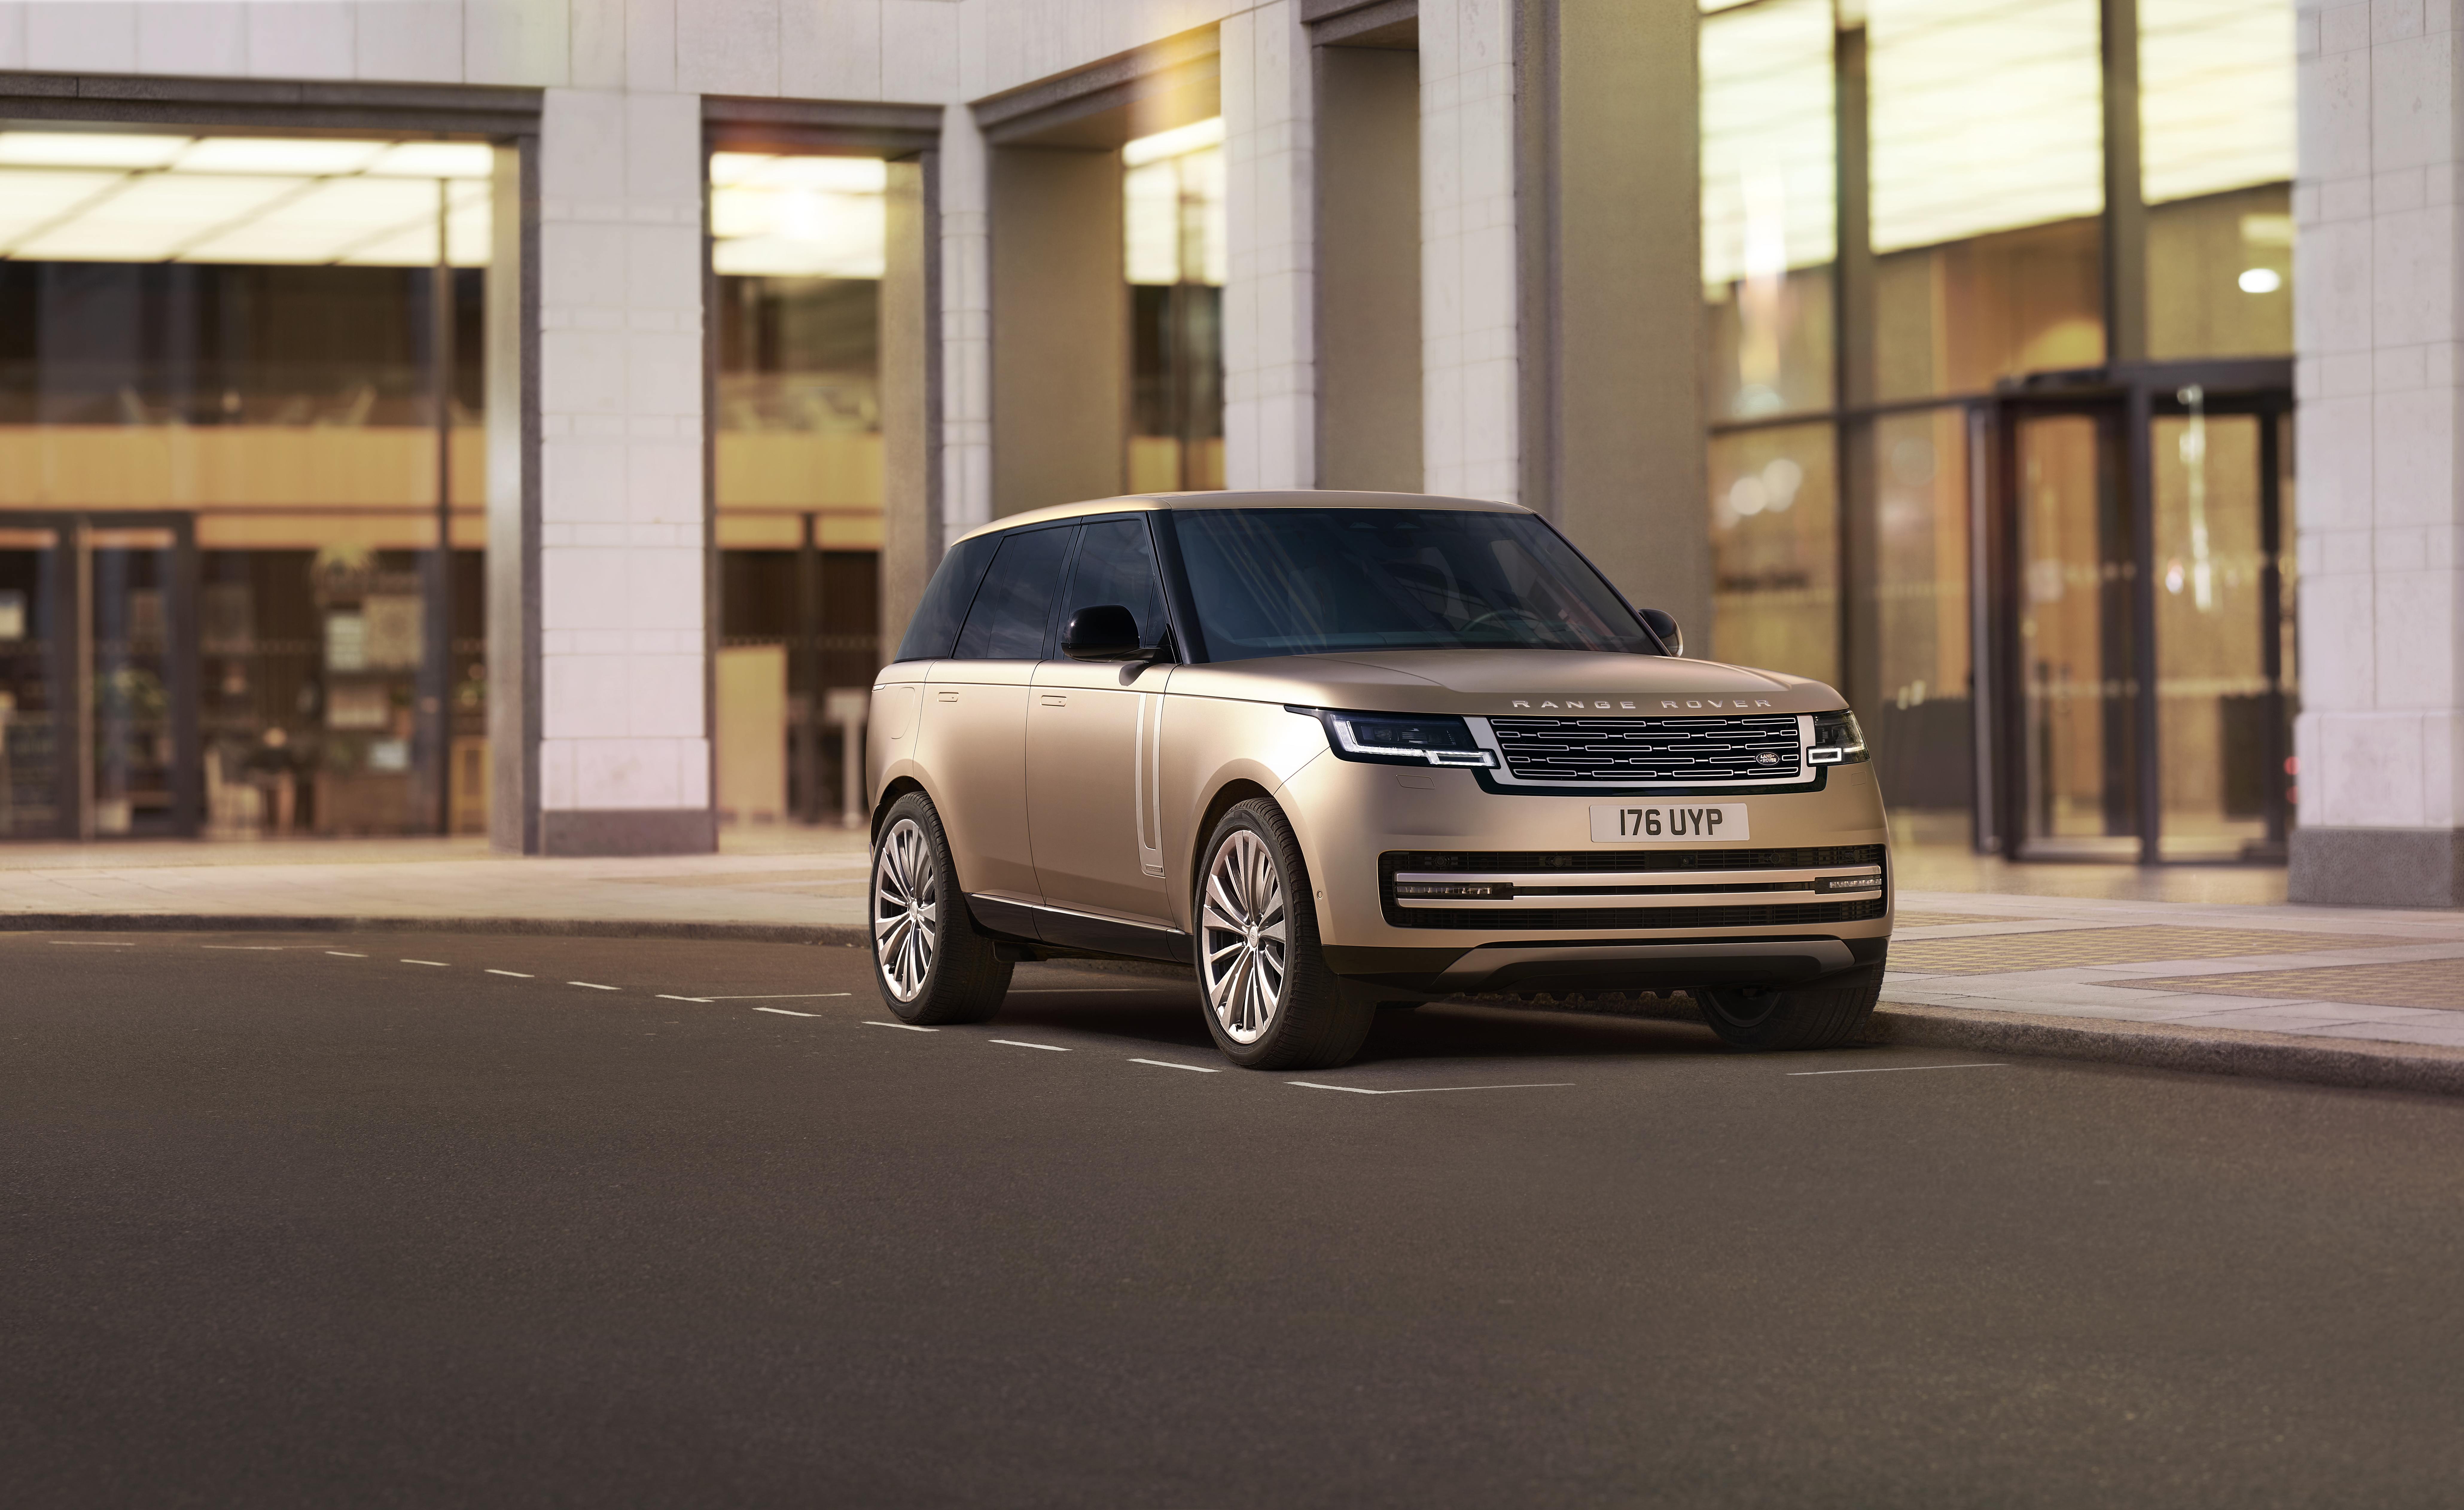 Range Rover Is An Architectural Powerhouse Wallpaper